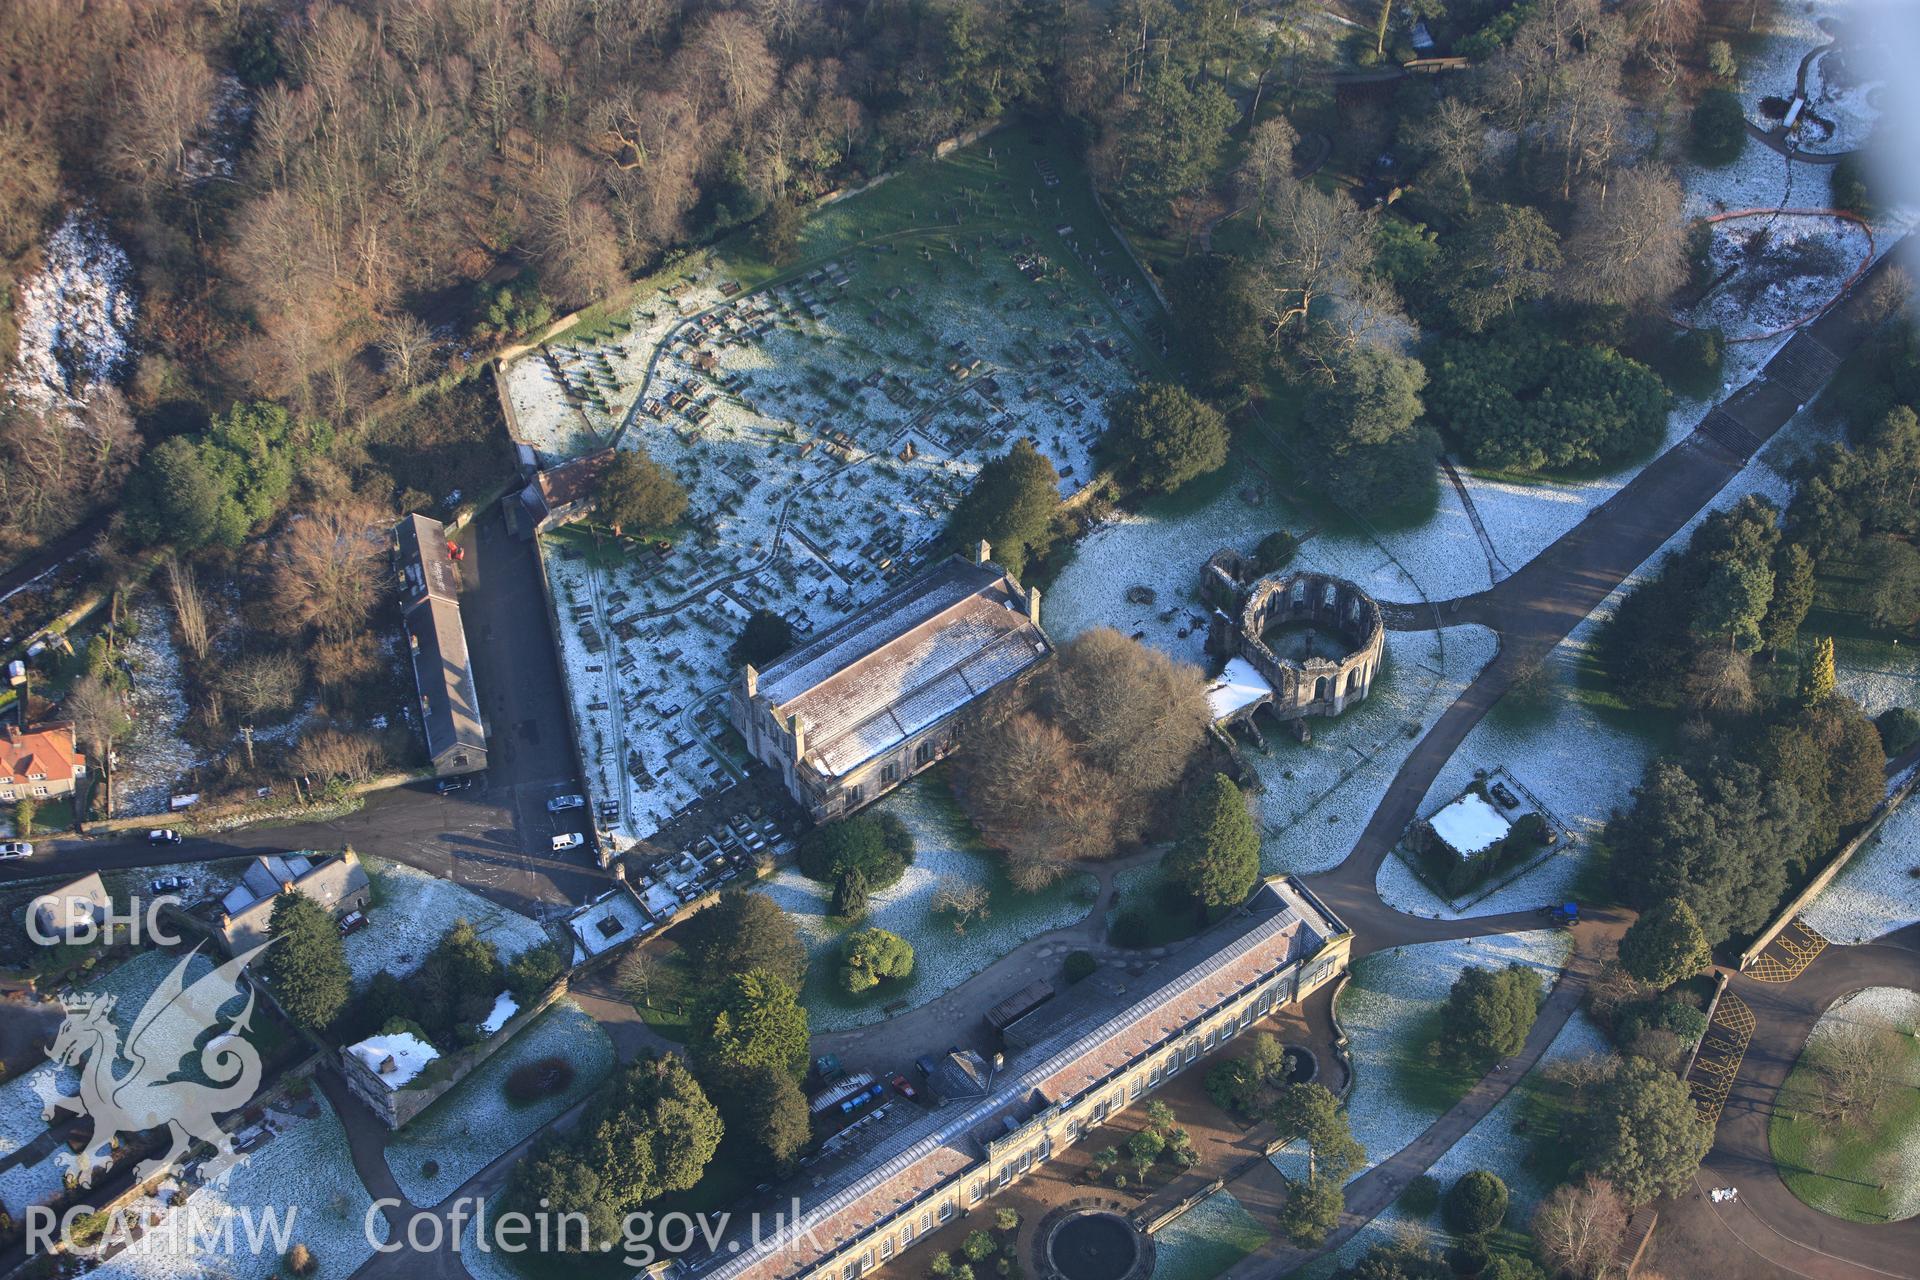 Margam Abbey, including Margam Castle orangery, St. Mary's church and Margam Park garden. Oblique aerial photograph taken during the Royal Commission?s programme of archaeological aerial reconnaissance by Toby Driver on 24th January 2013.